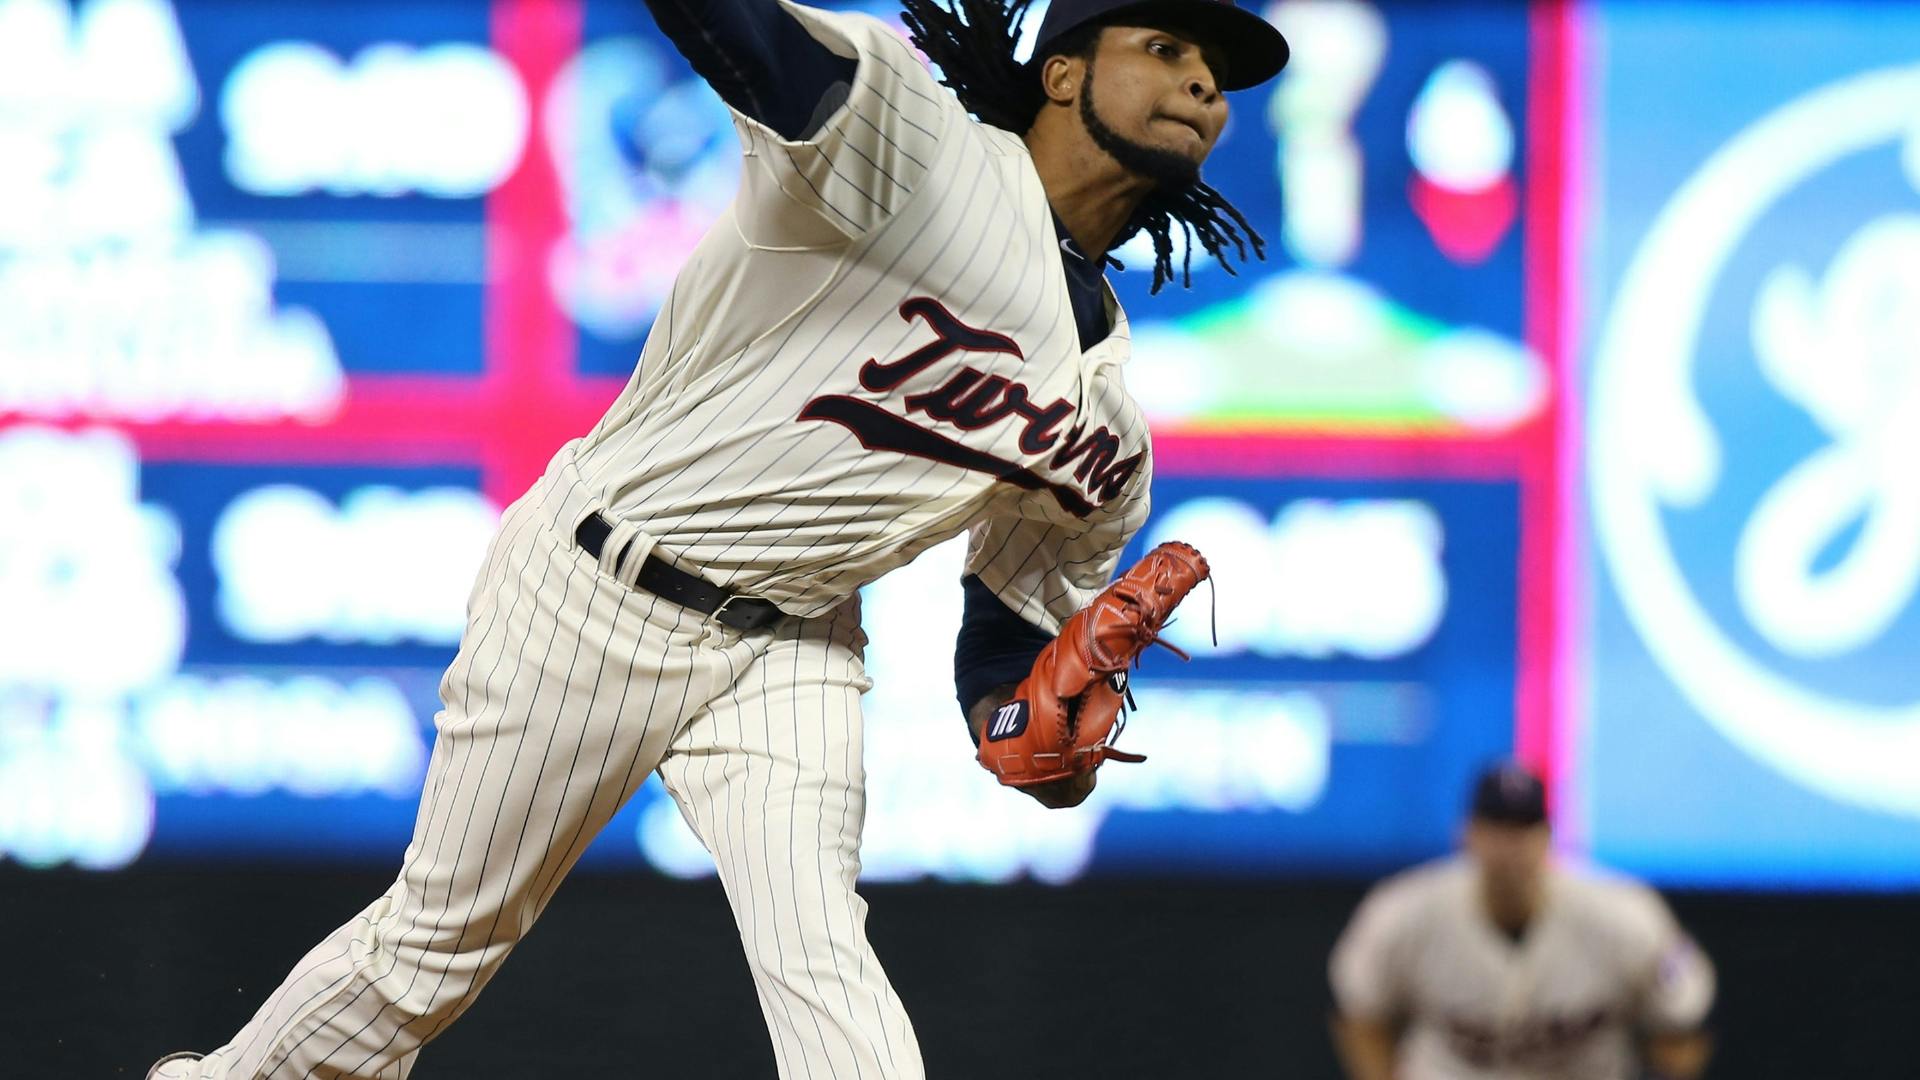 Twins righthander Ervin Santana says he was rushing his pitches in first two innings Wednesday, but he recovered to pitch seven innings with just two runs.